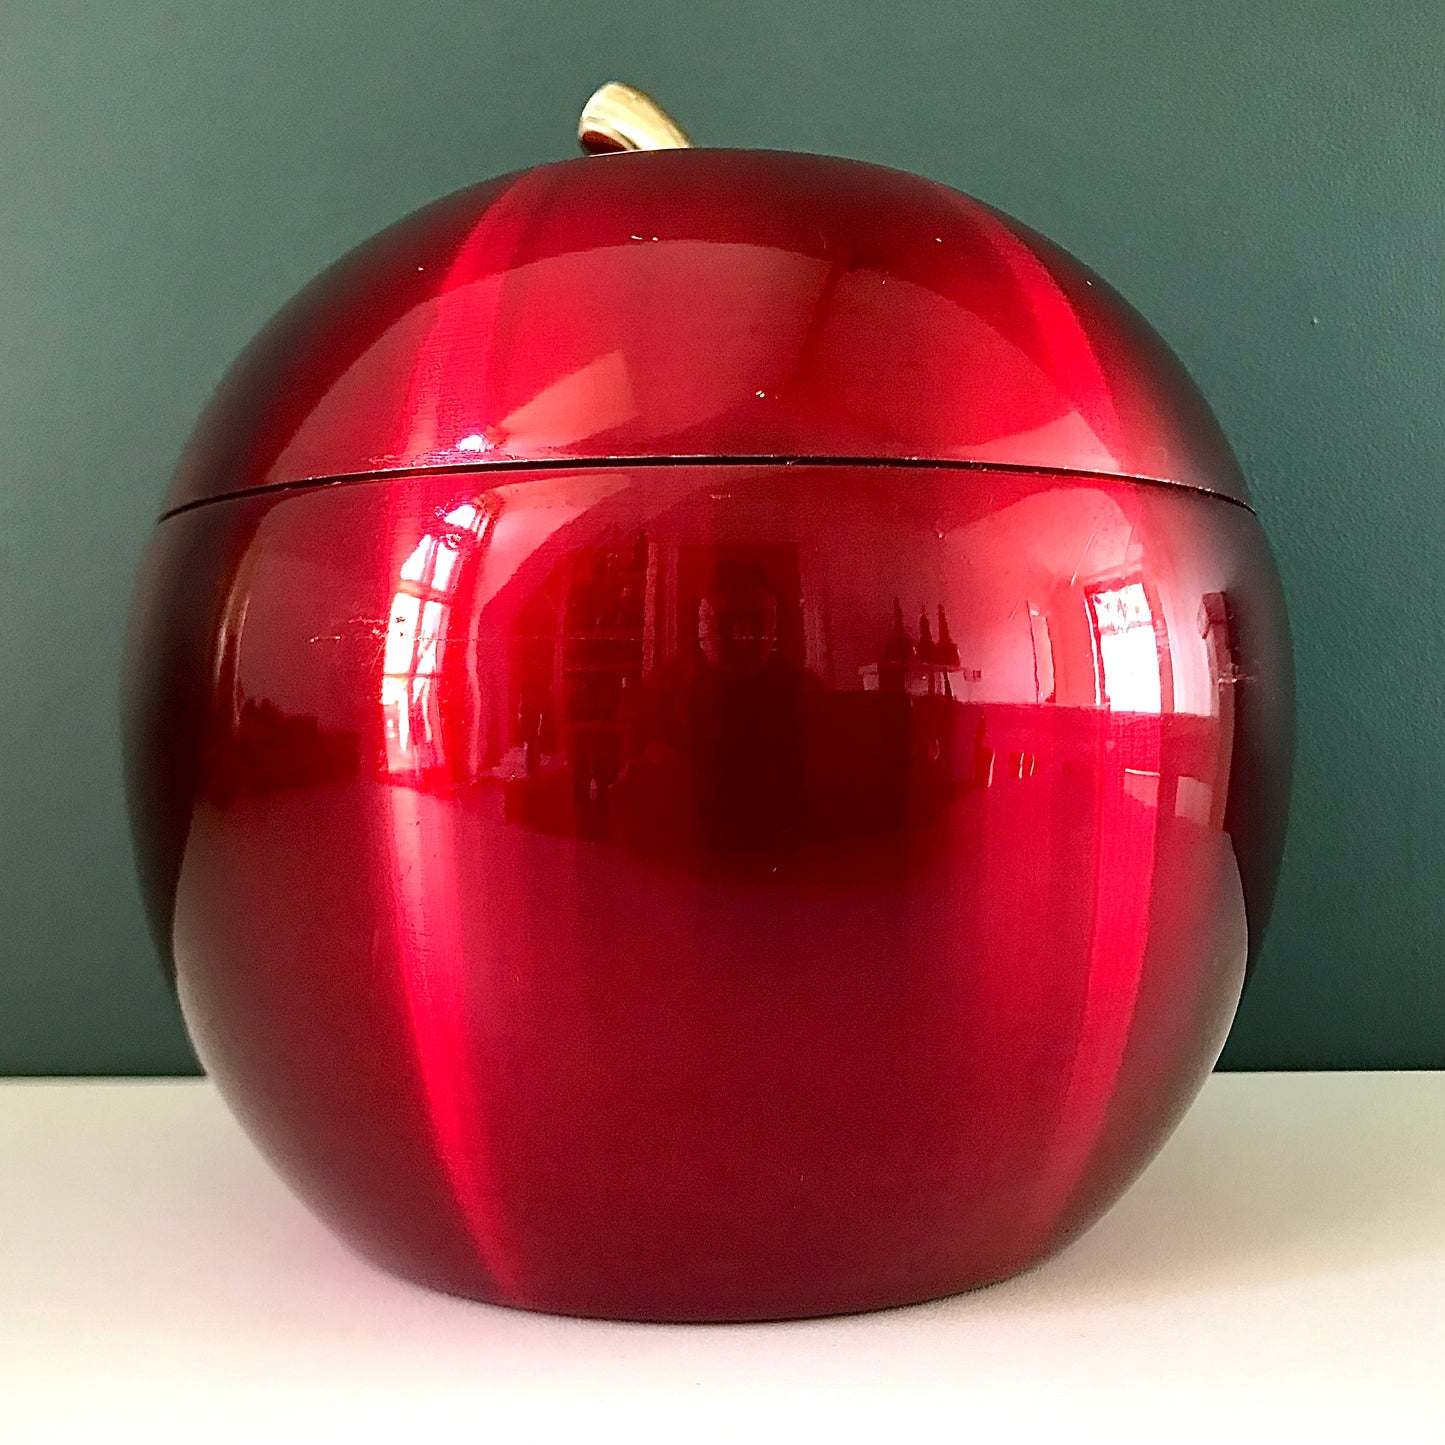 Daydream Australia Candy Apple Red Ice Bucket Kitsch 1960s Vintage Retro Barware Atomic Mens Fathers Gifts Presents